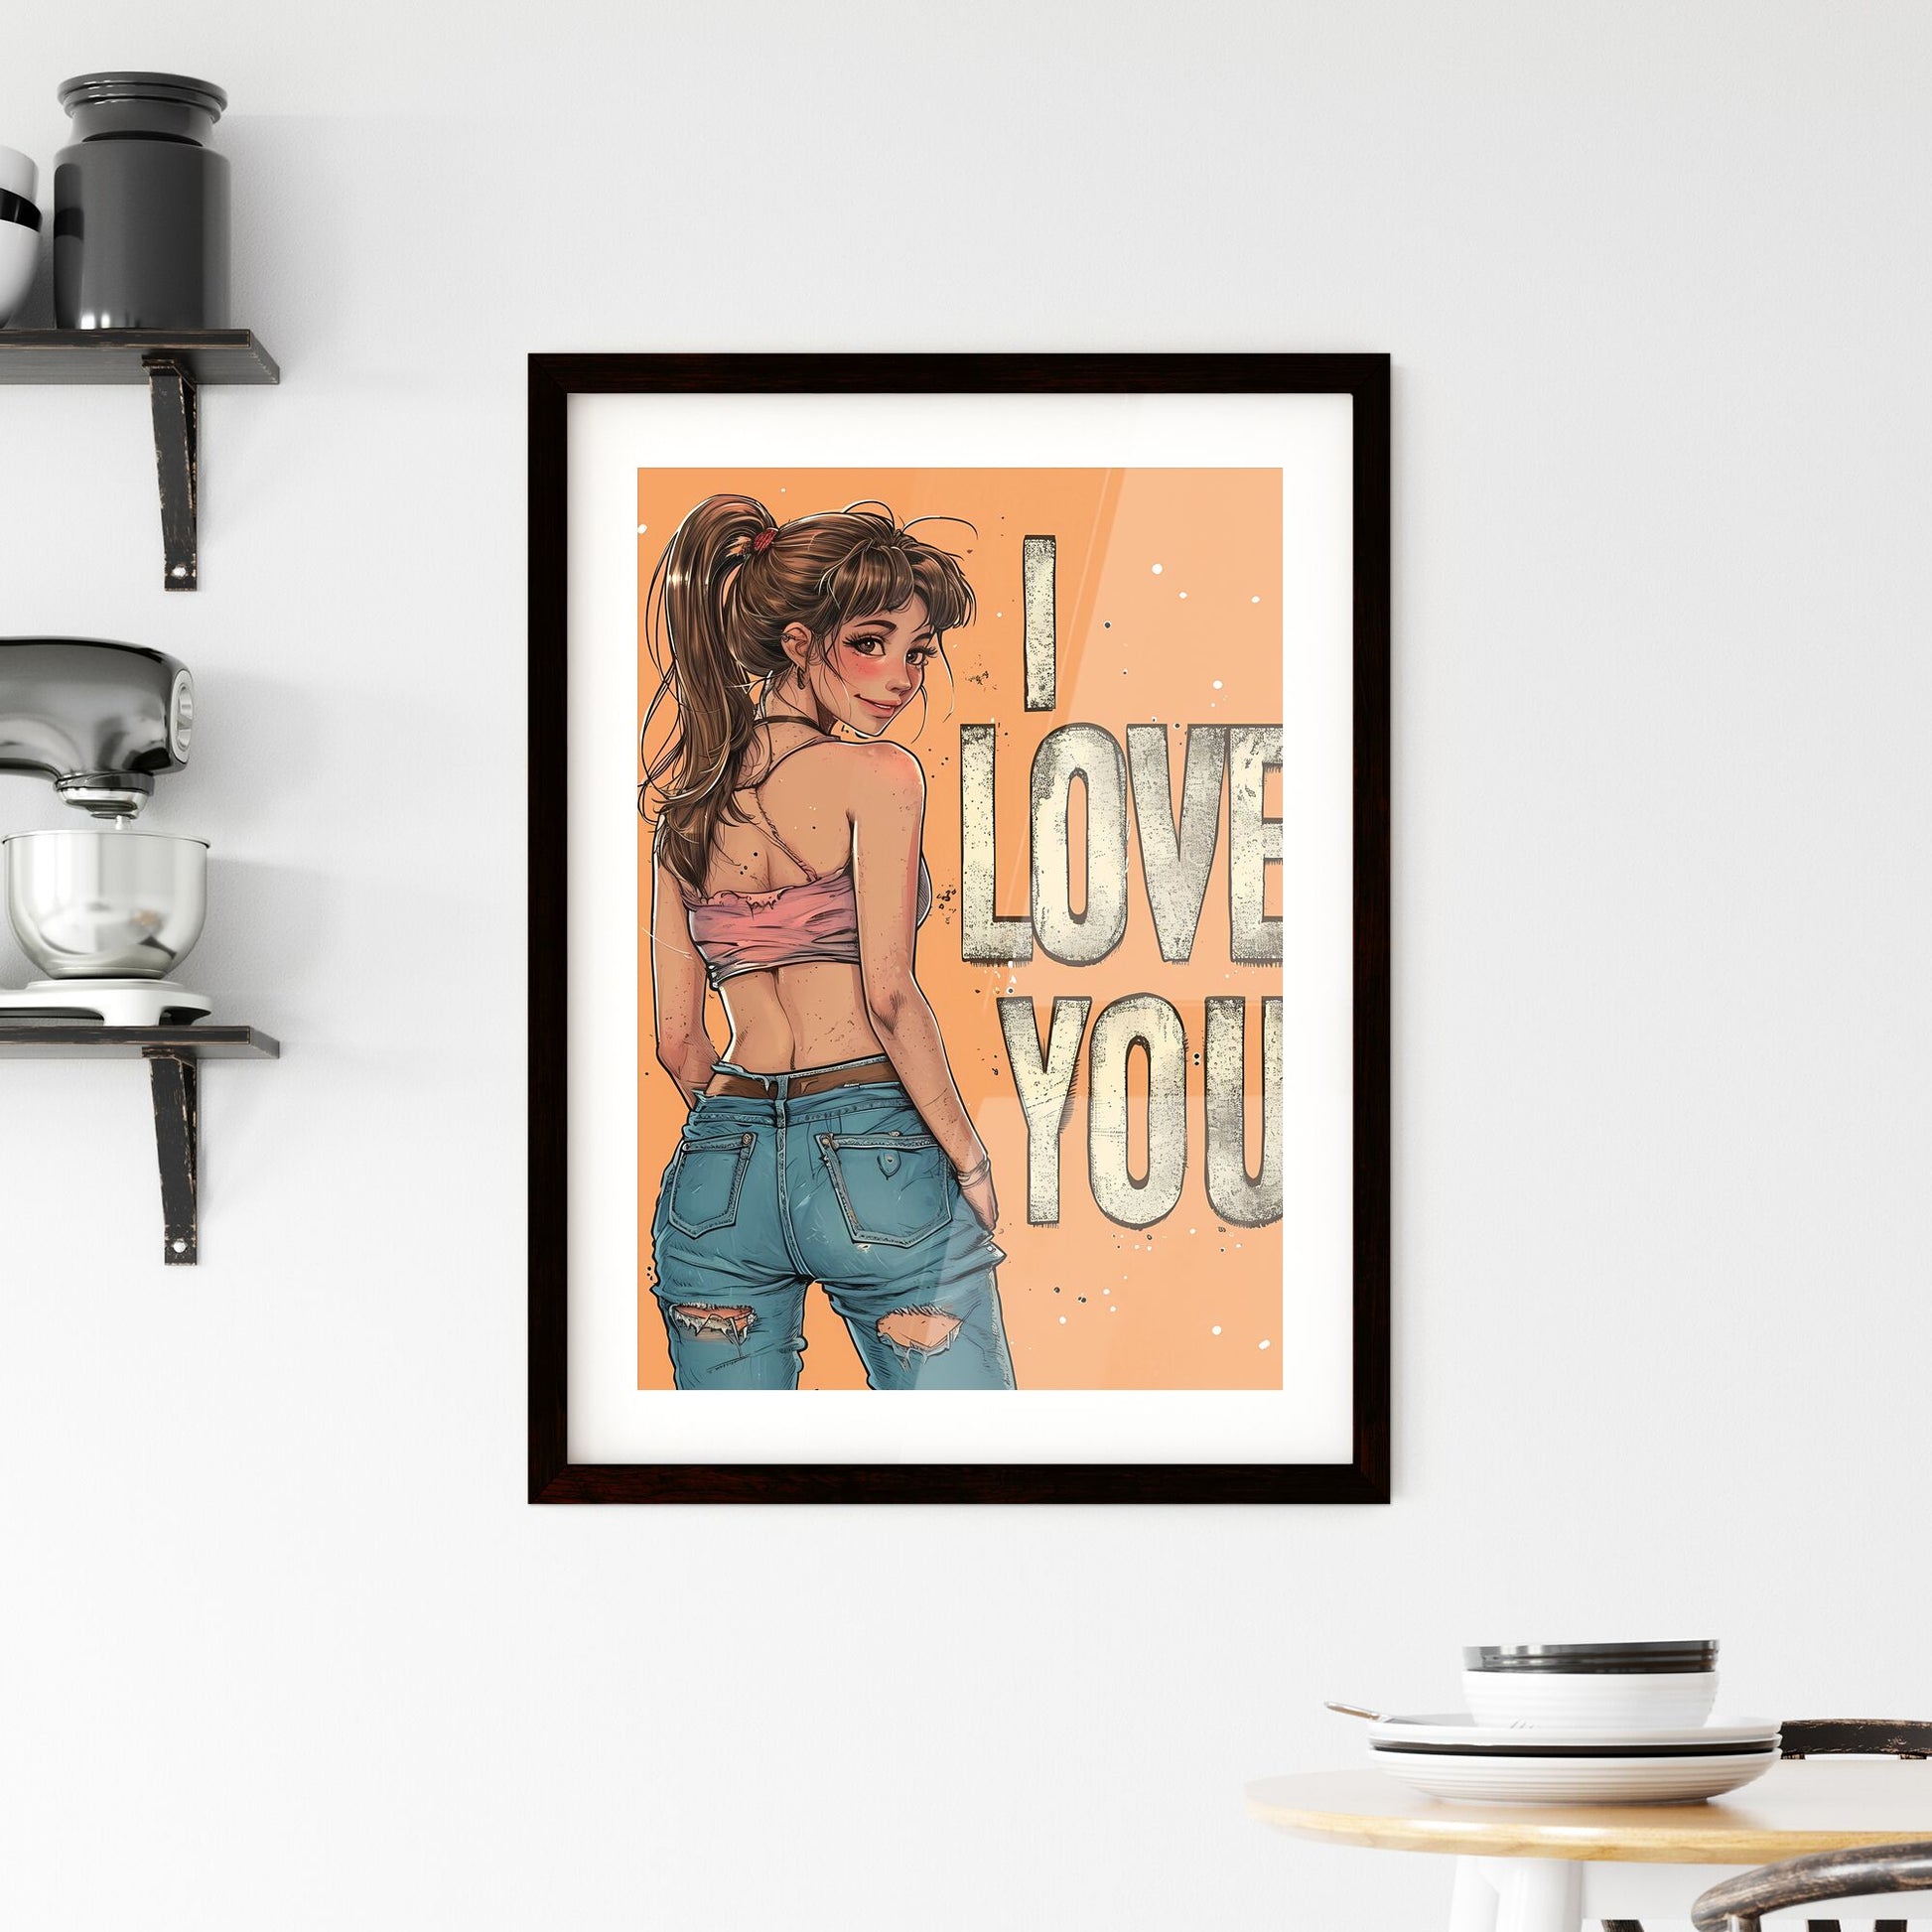 I LOVE YOU isolated - Art print of a cartoon of a woman Default Title